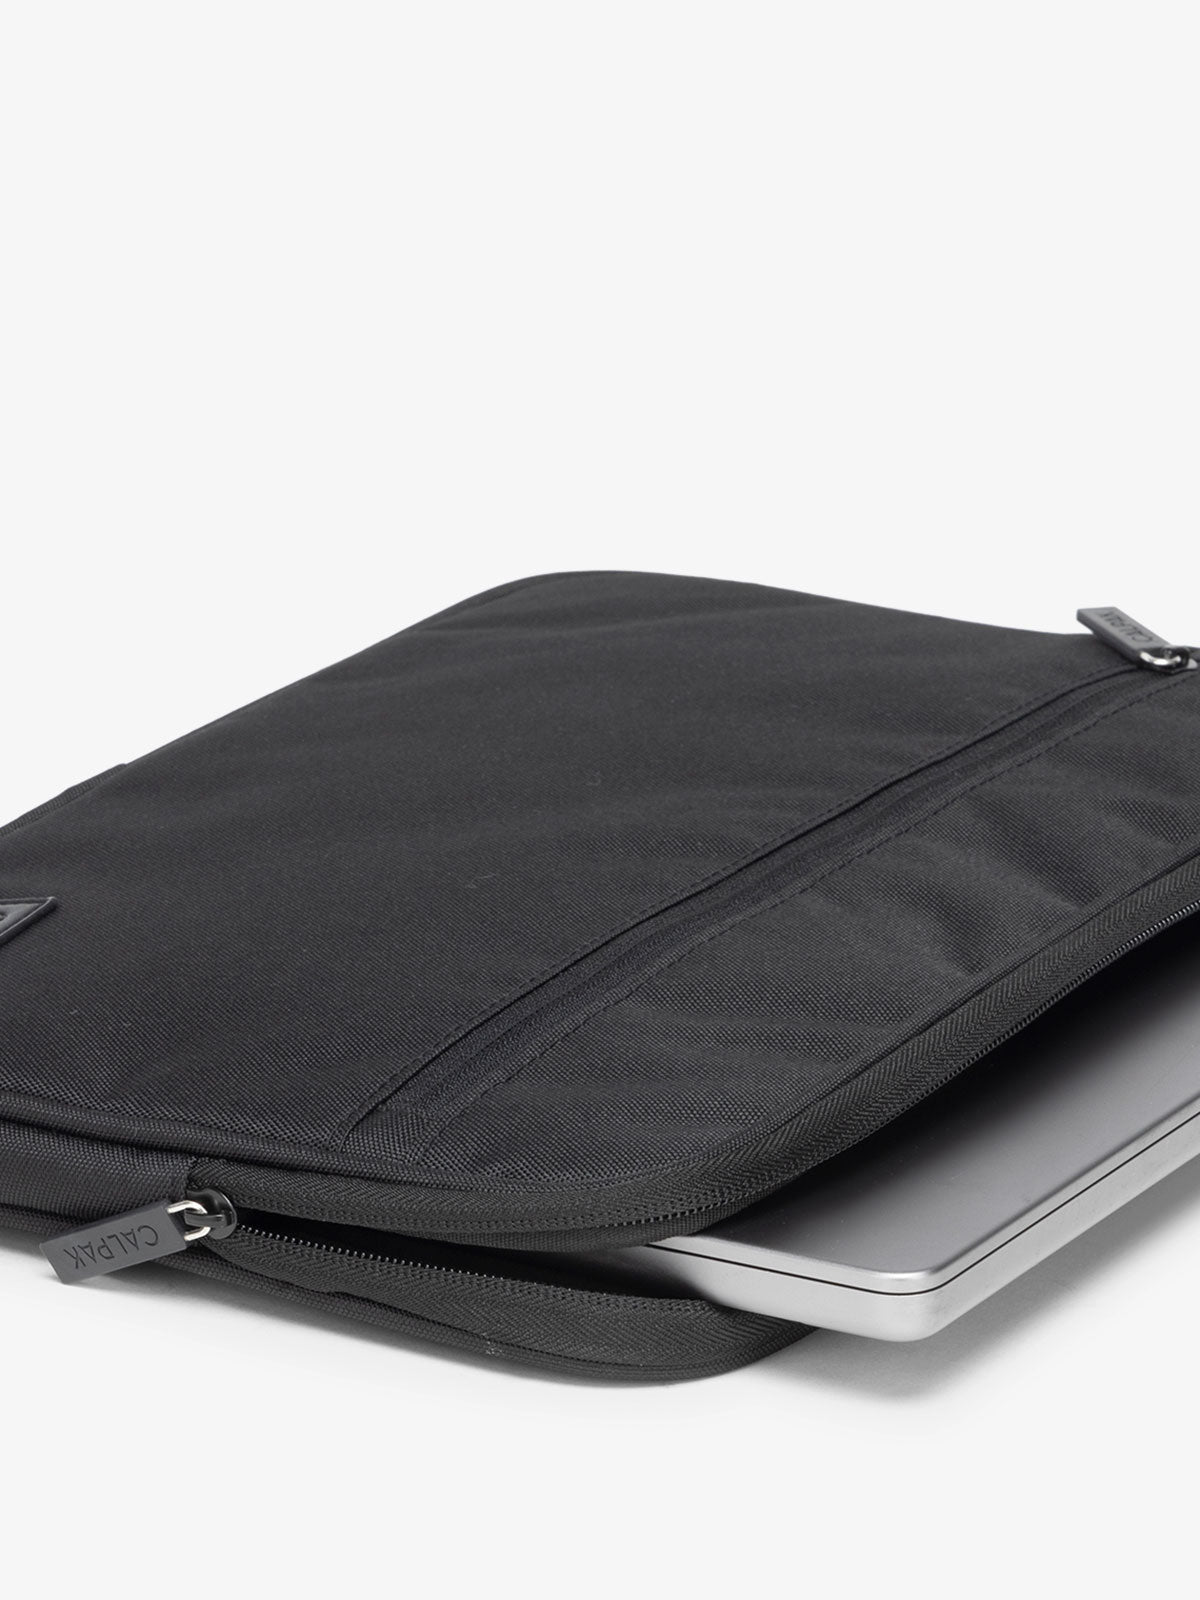 CALPAK 15-17 Inch soft Laptop case with padded pockets in black